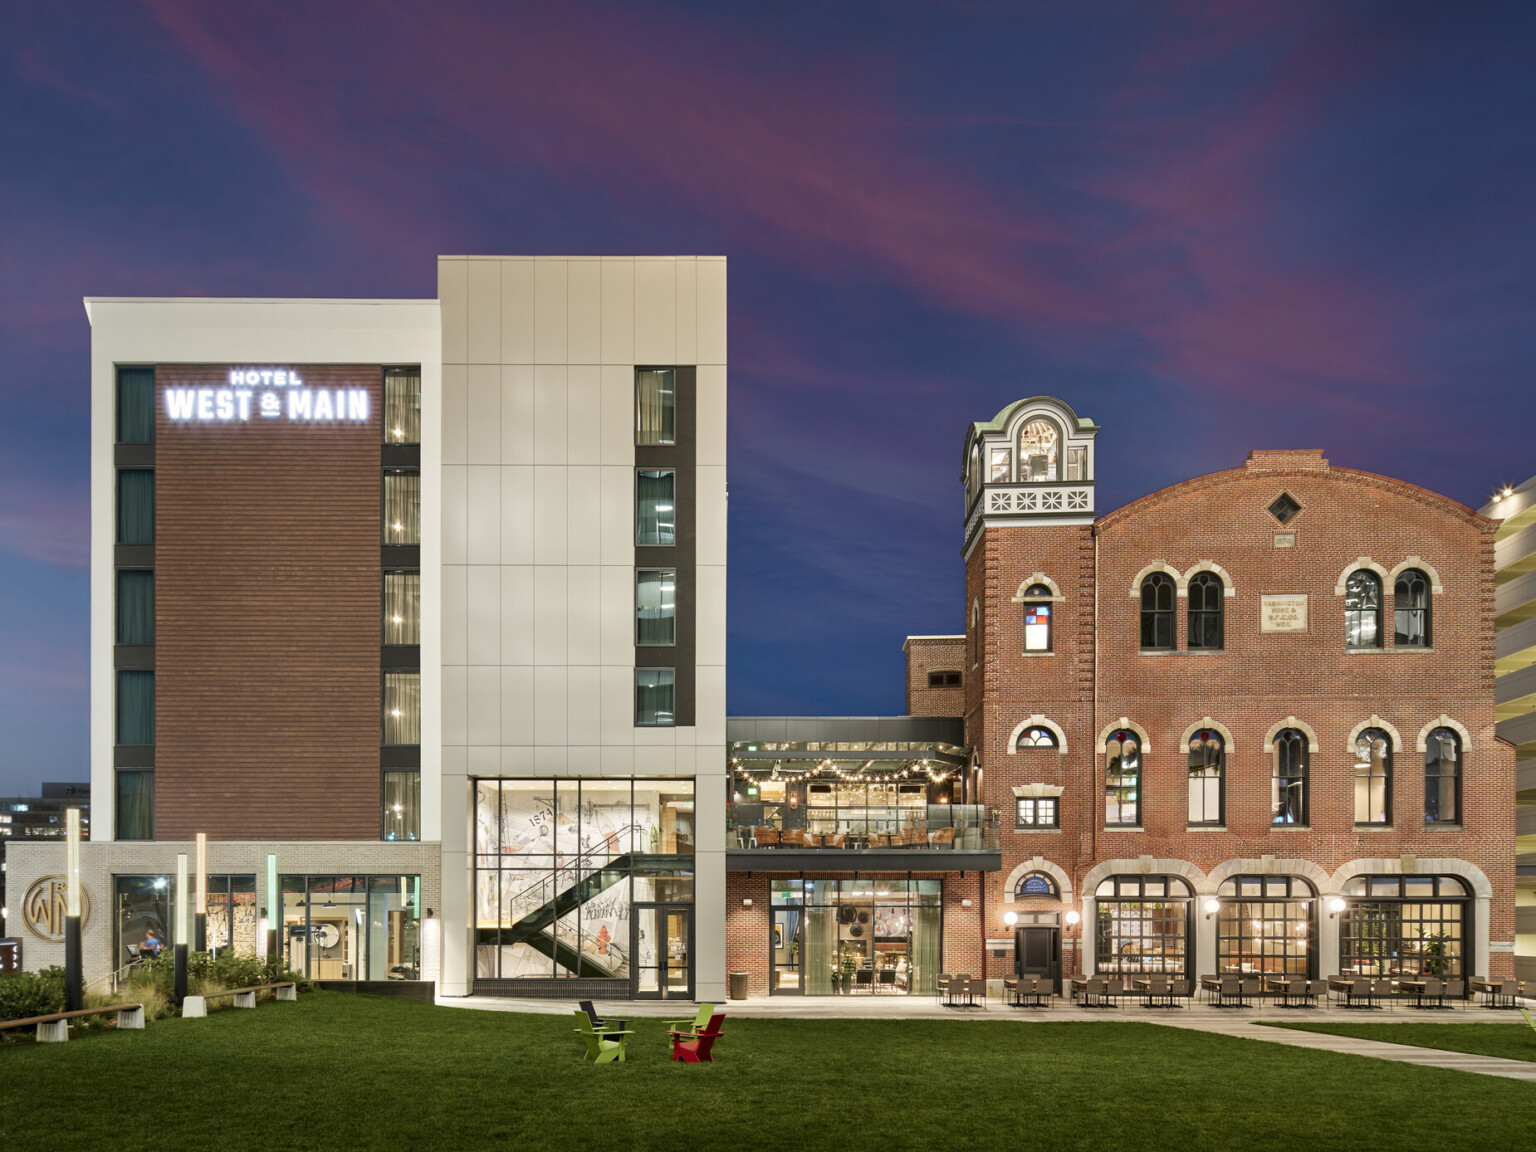 On the left, a new multi-story hotel wrapped in light siding with brick accents and on the right, the former brick fire station connects to the new hotel by an enclosed structure with a rooftop balcony overlooking a lawn.